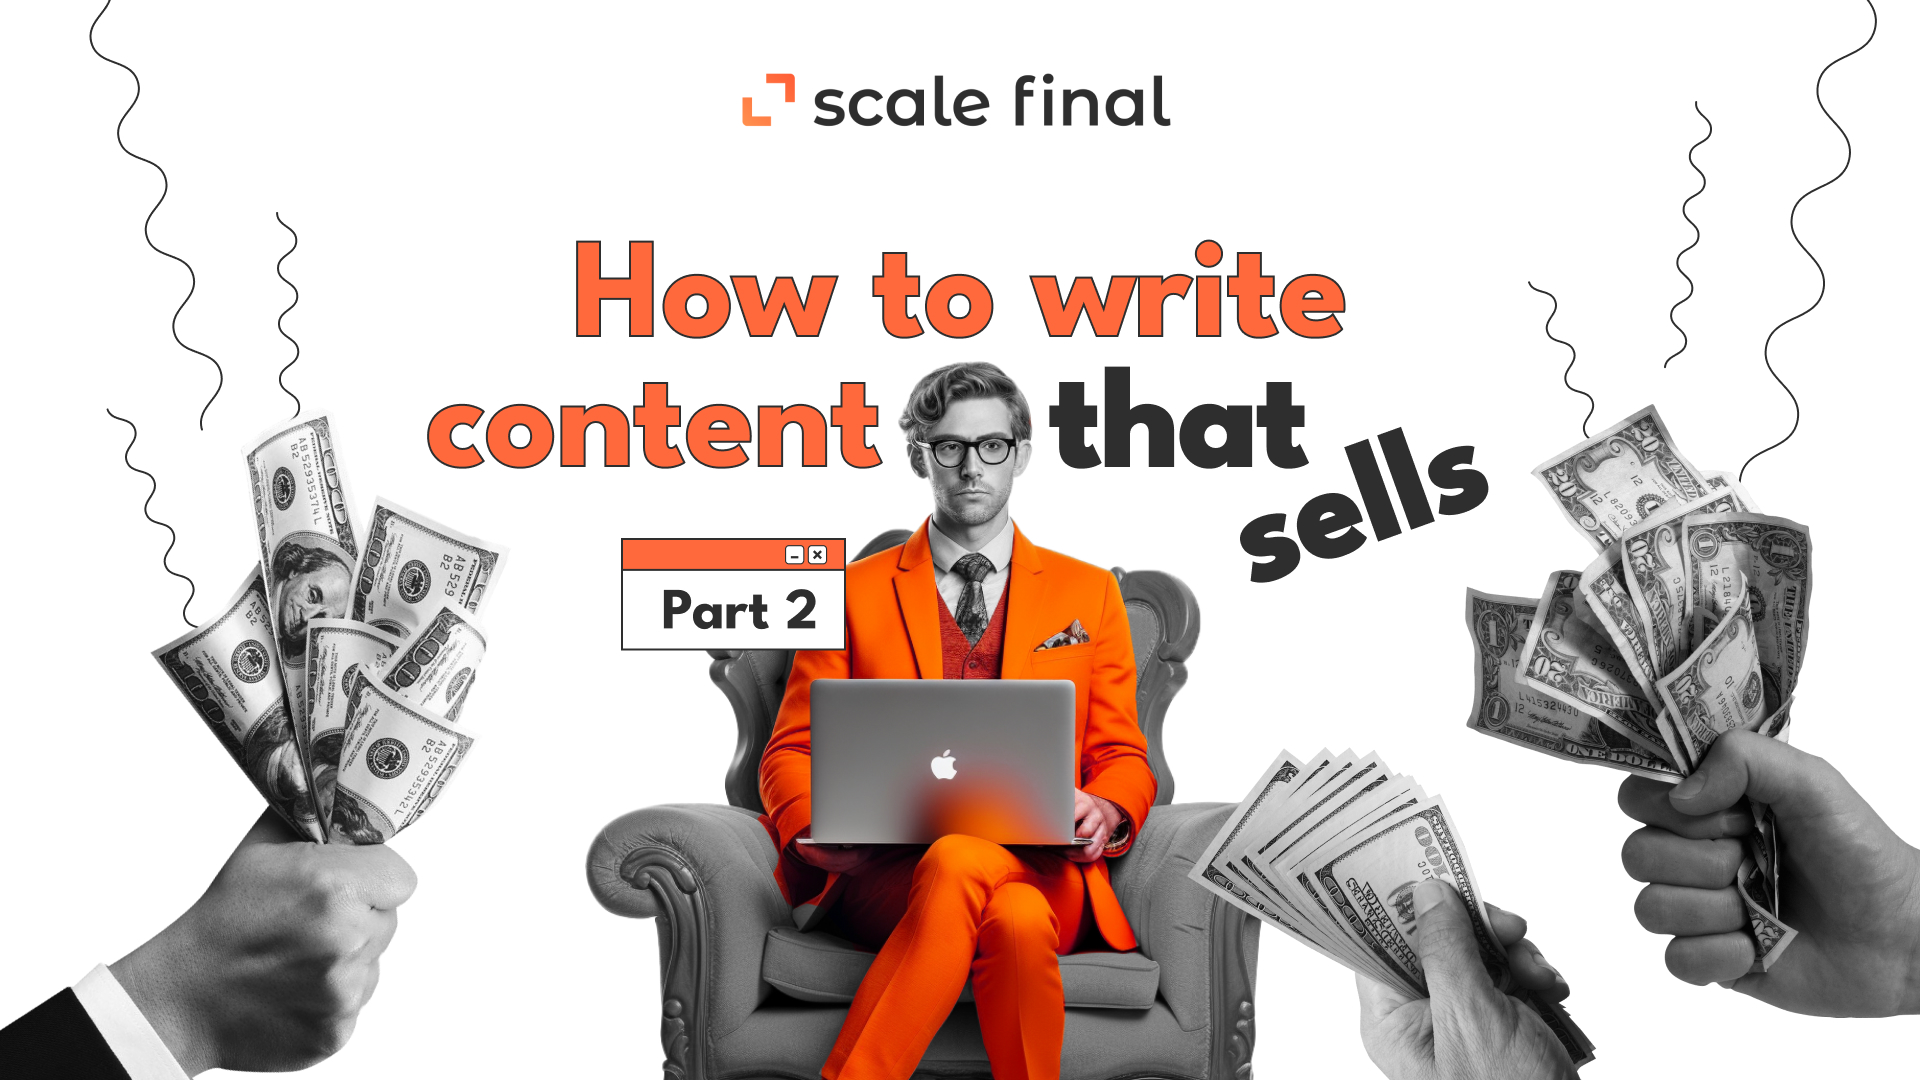 How to write content that sells Part 2